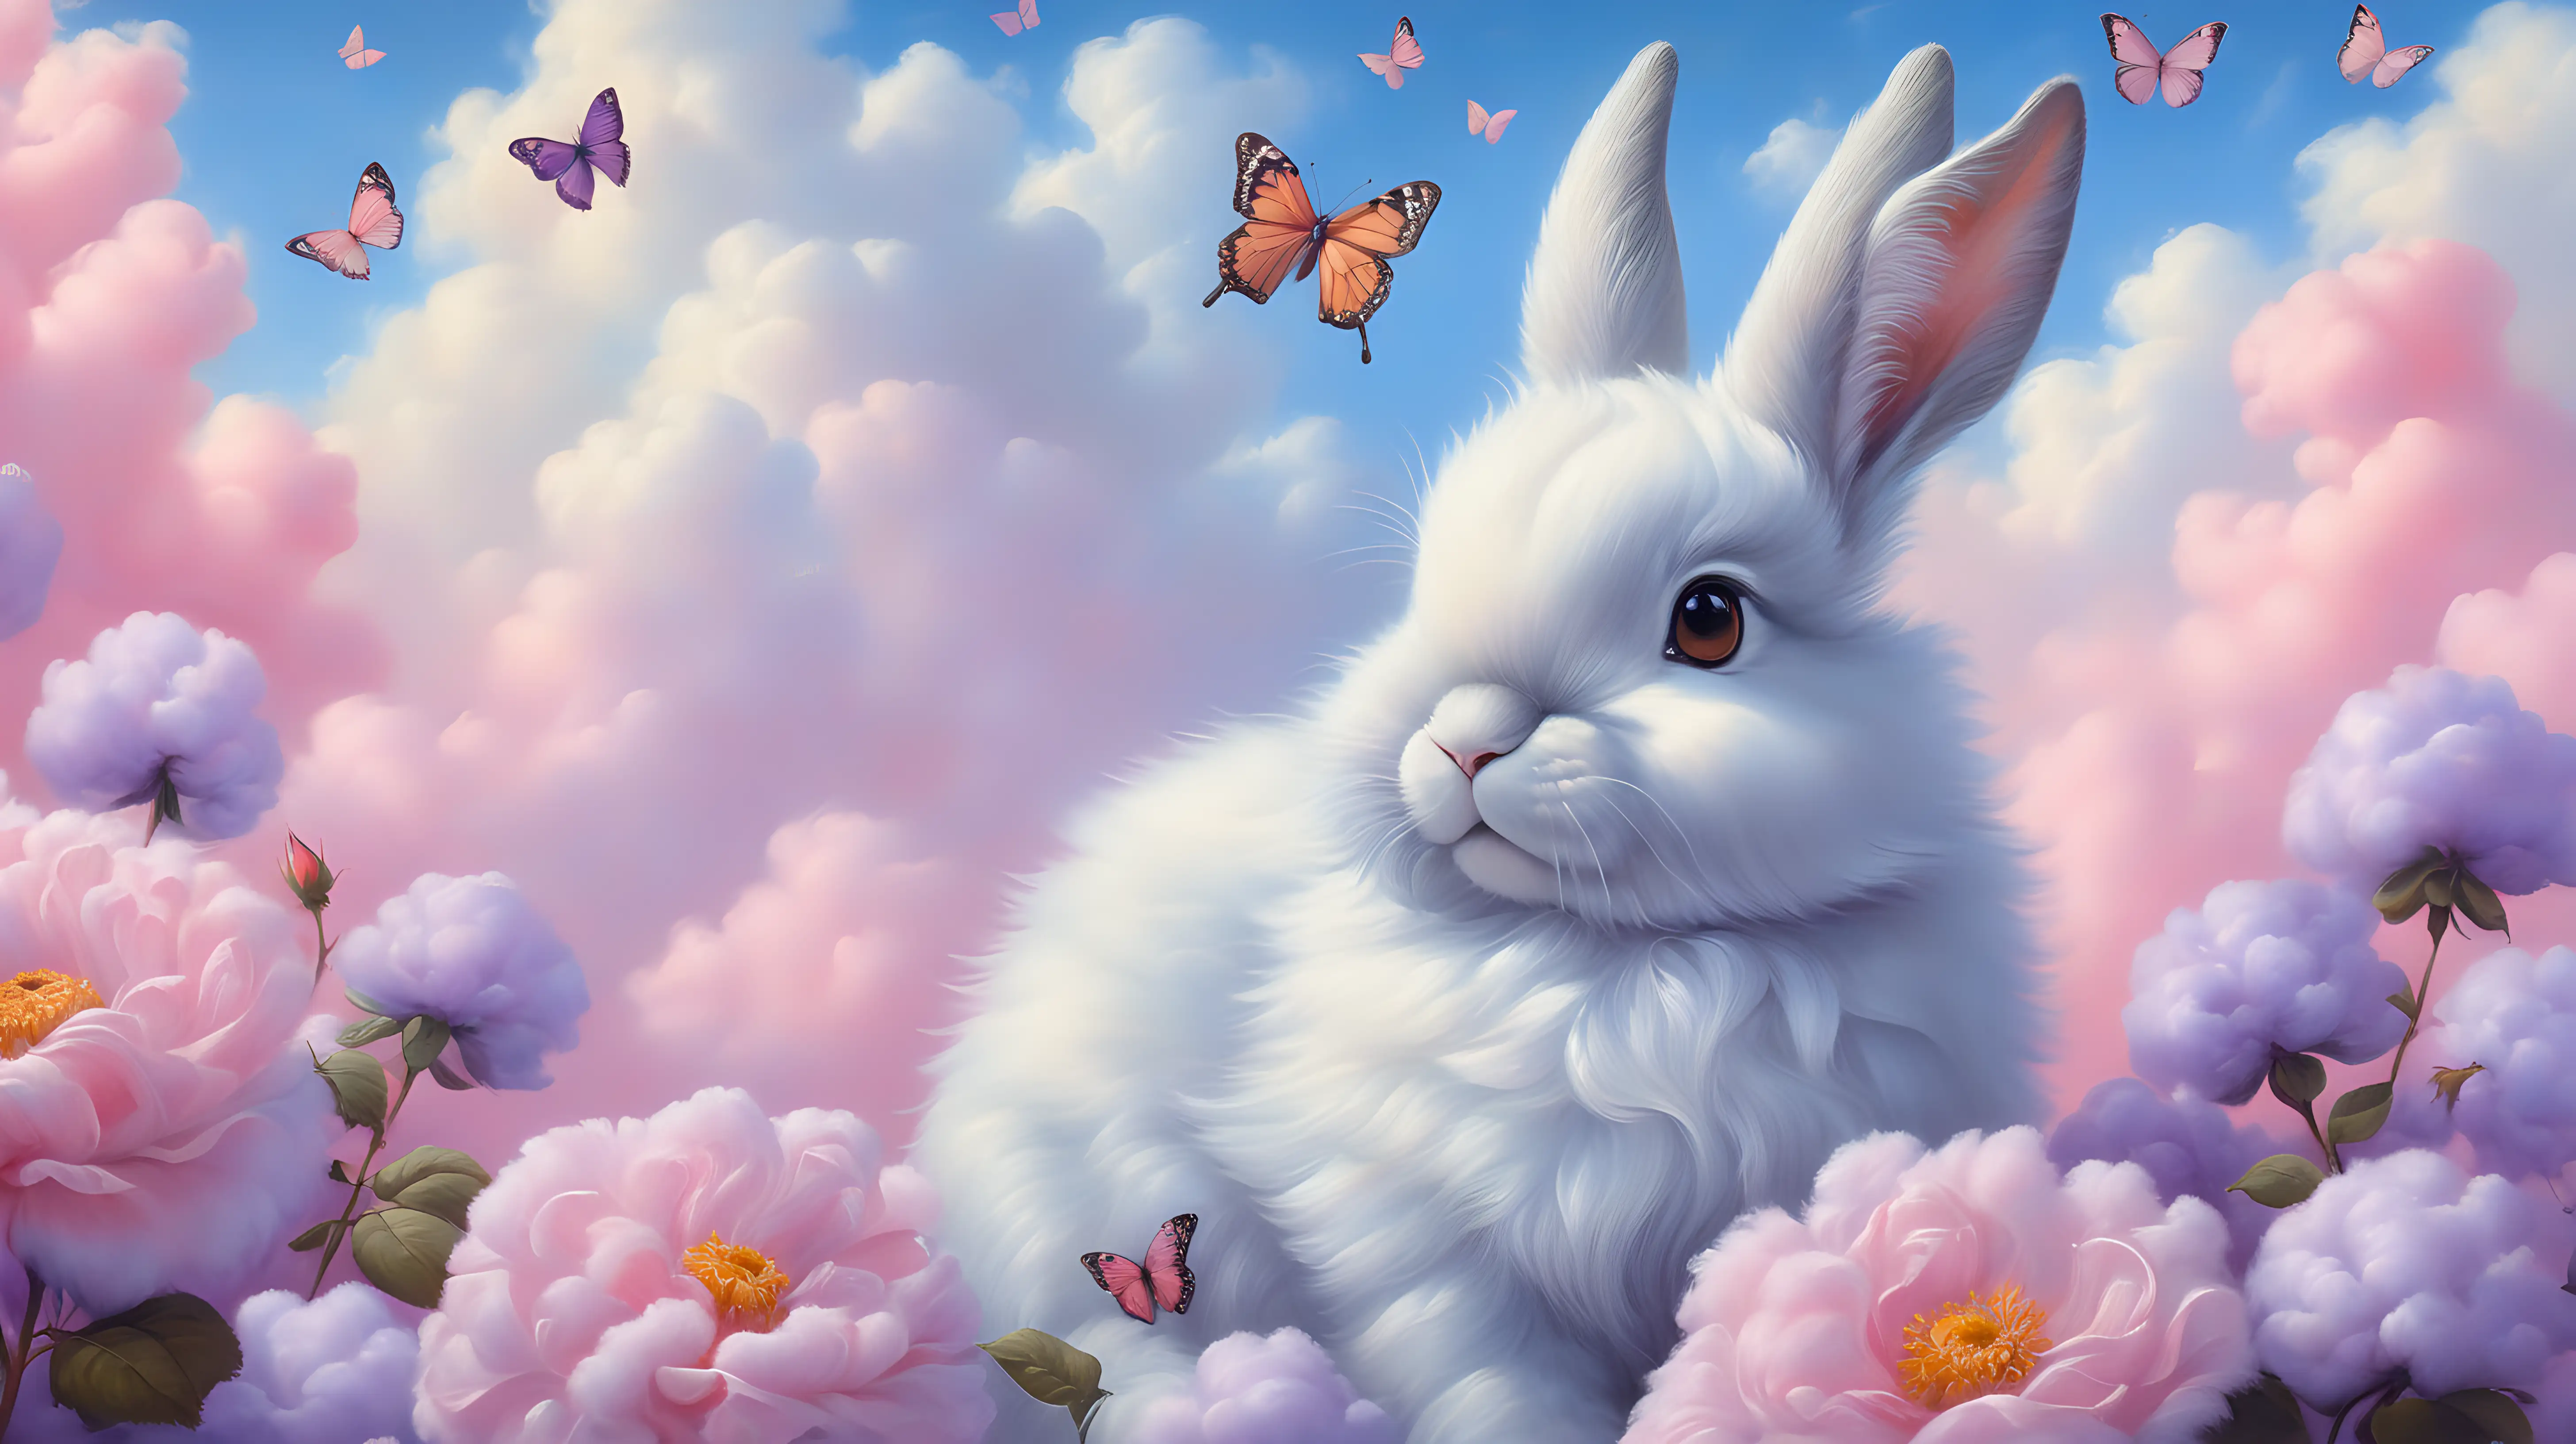 oil painting of a cute fluffy rabbit and butterfly (#3F00FF) and a rose cupcake. Surrounded by pastel pink and purple cotton candy flowers and white cotton candy clouds. #F8C8DC